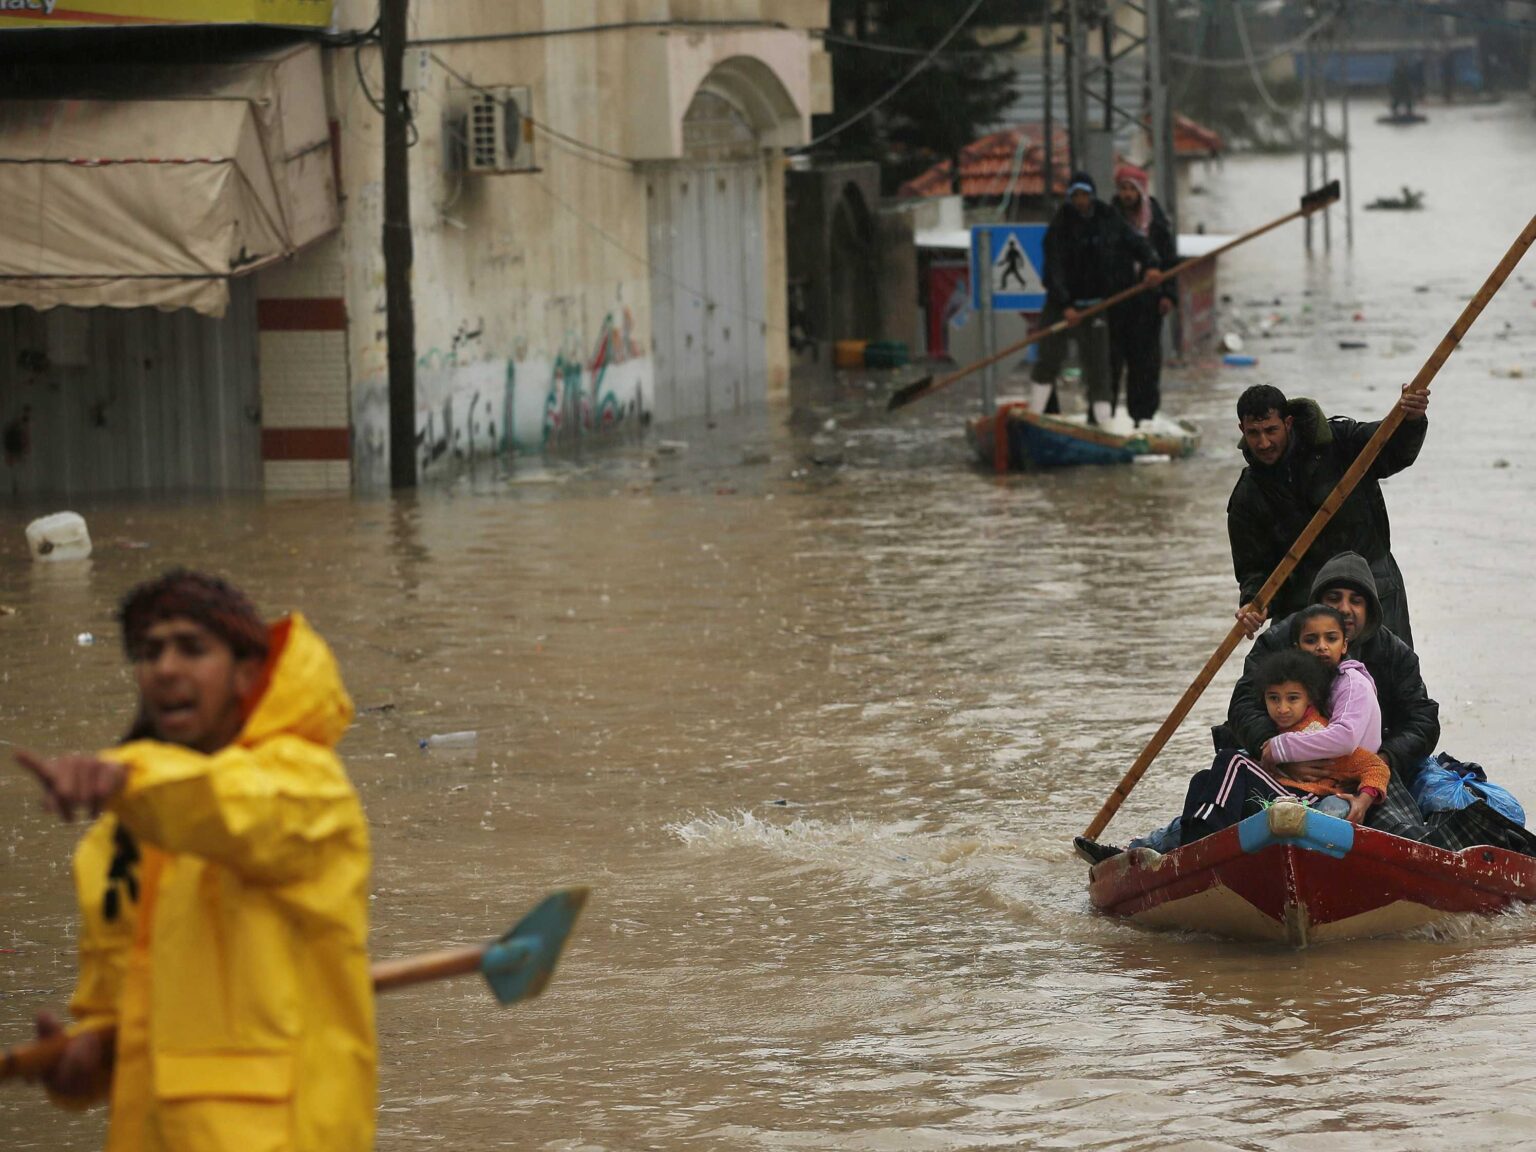 thousands-of-people-evacuated-by-boat-as-rain-turns-northern-gaza-into-a-disaster-area